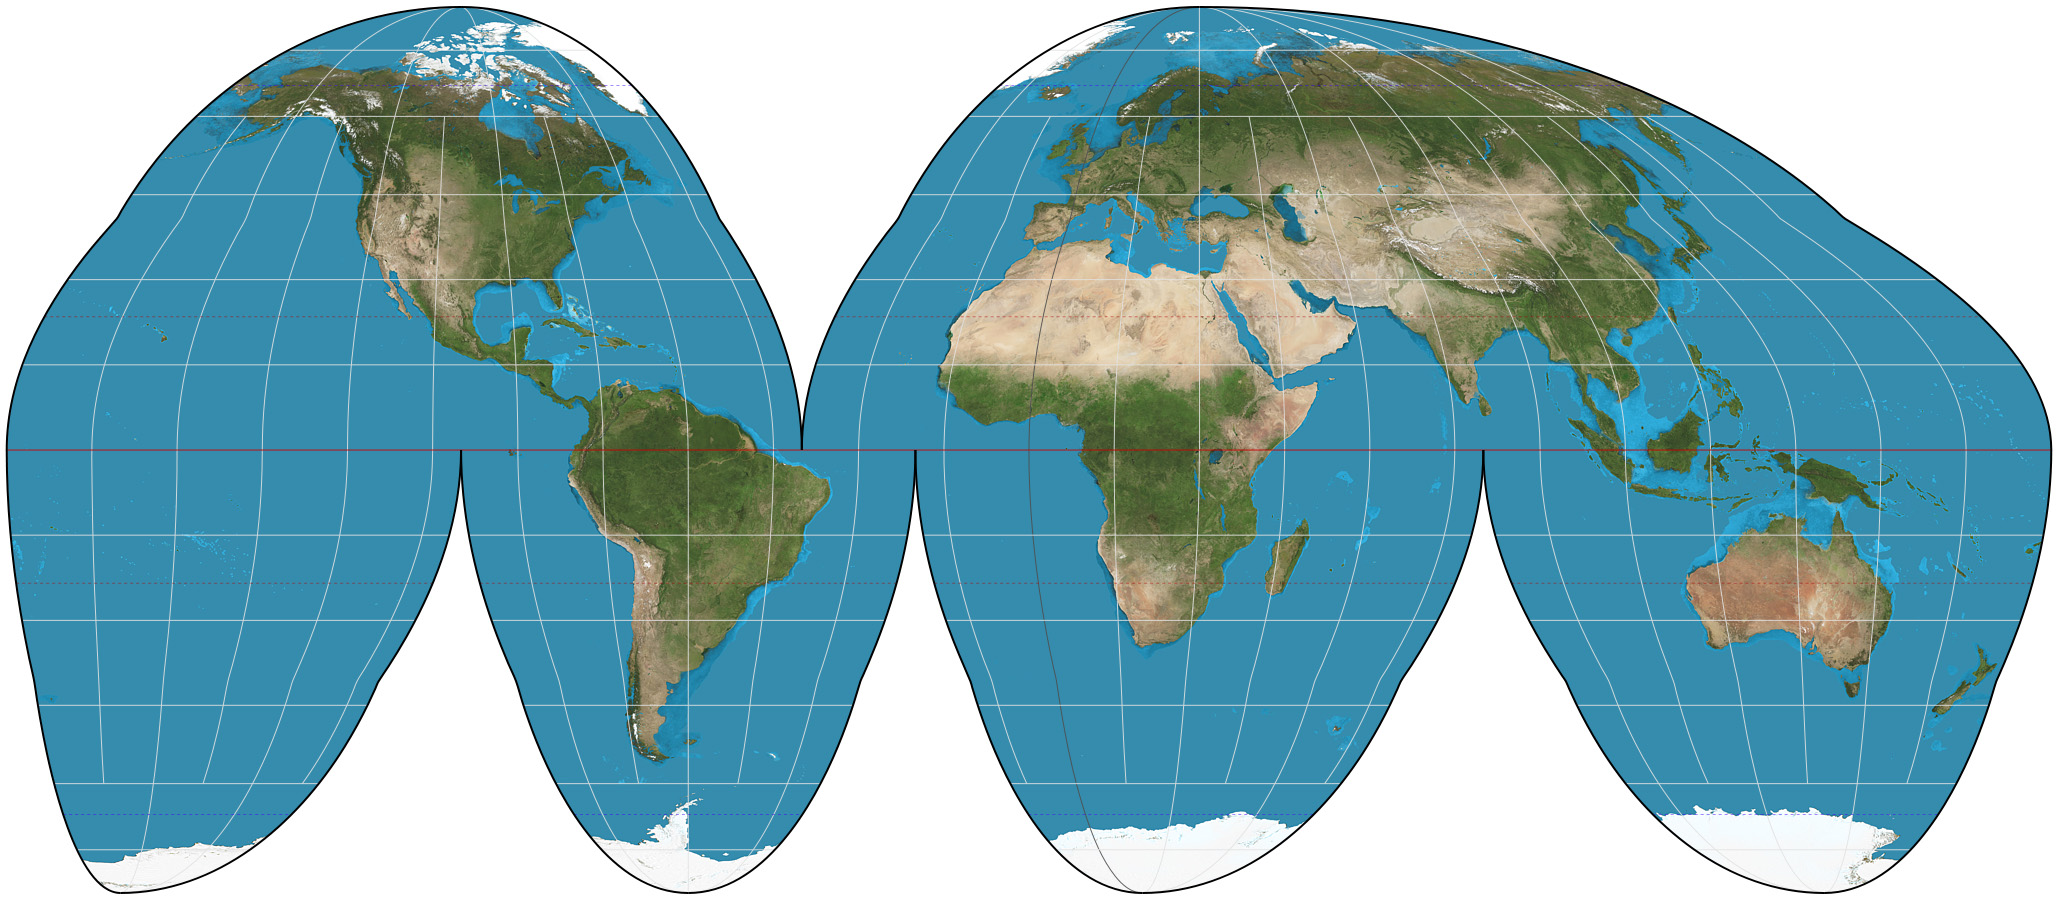 map of the world using the Goode homolosine projection